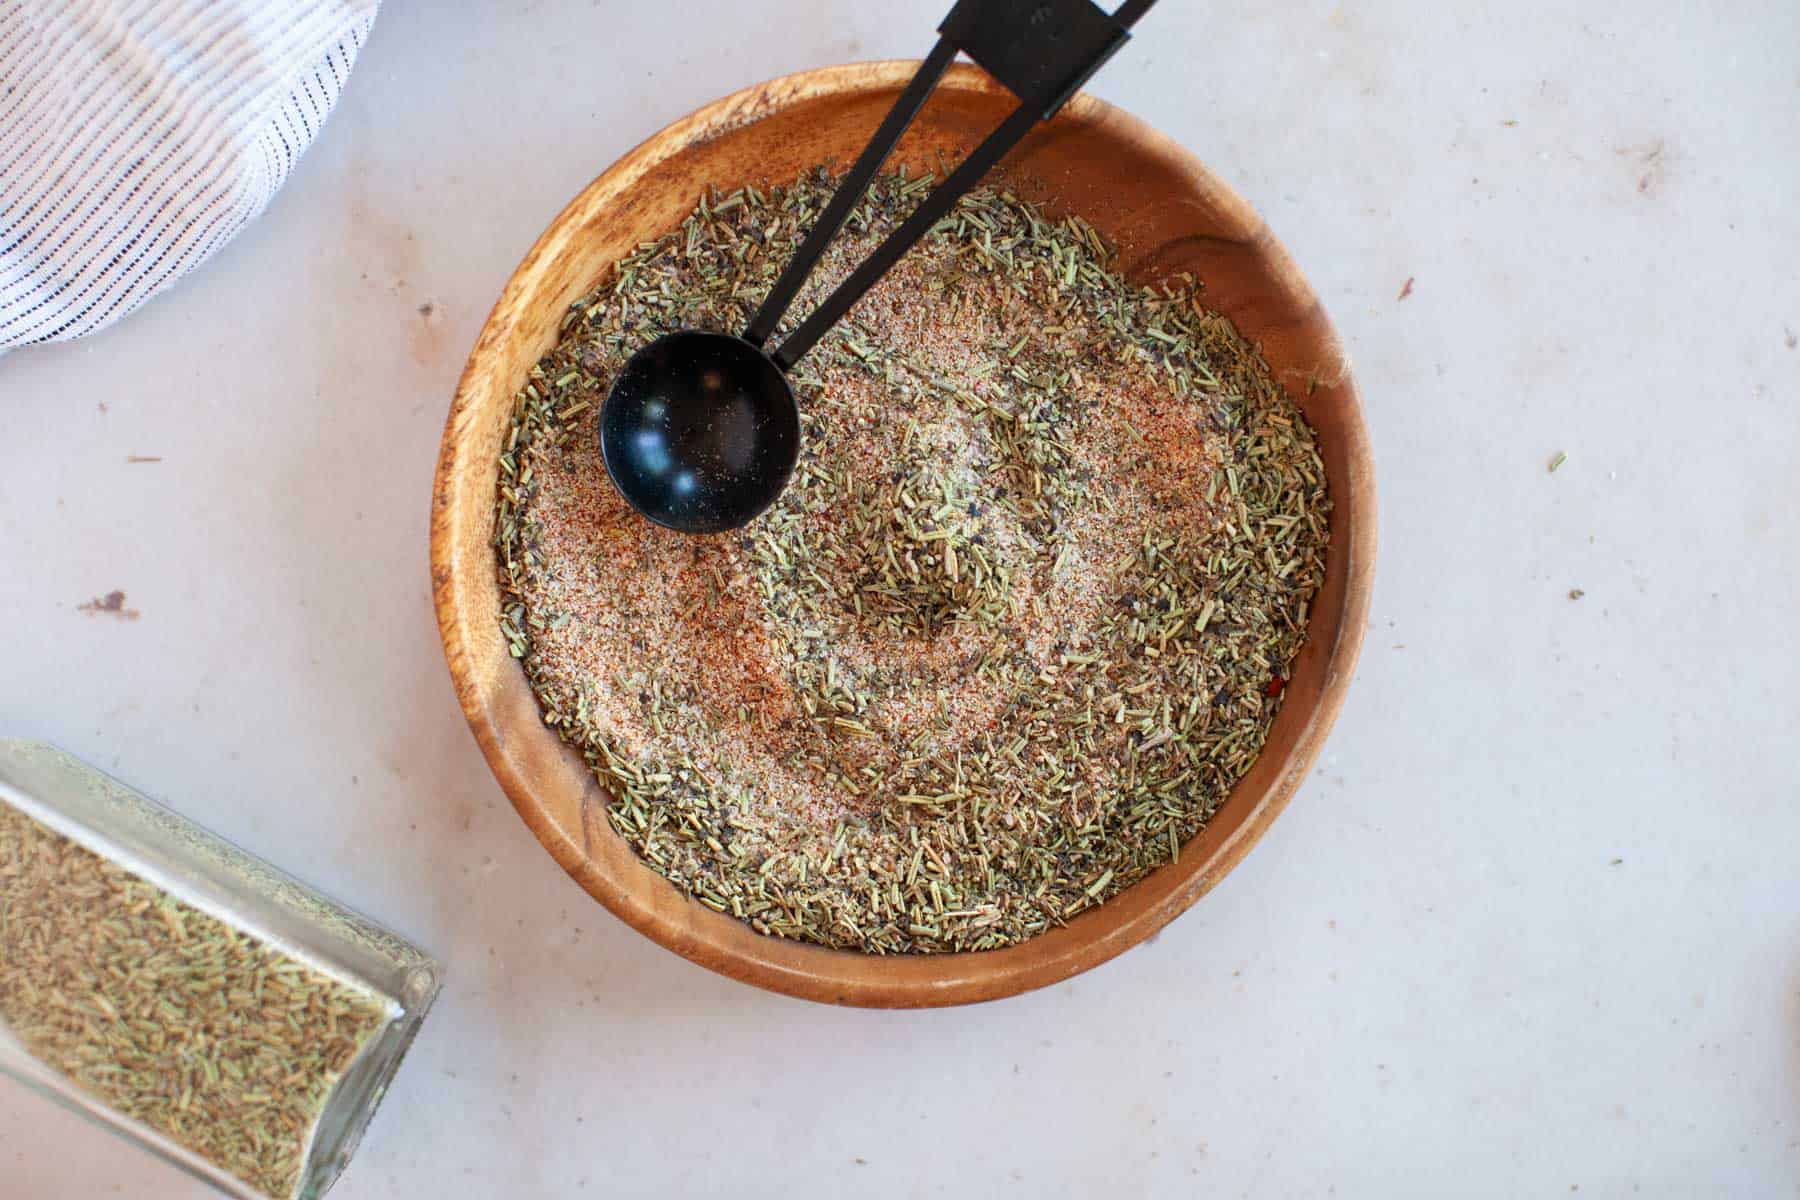 A bowl of herbs and spices on a table.